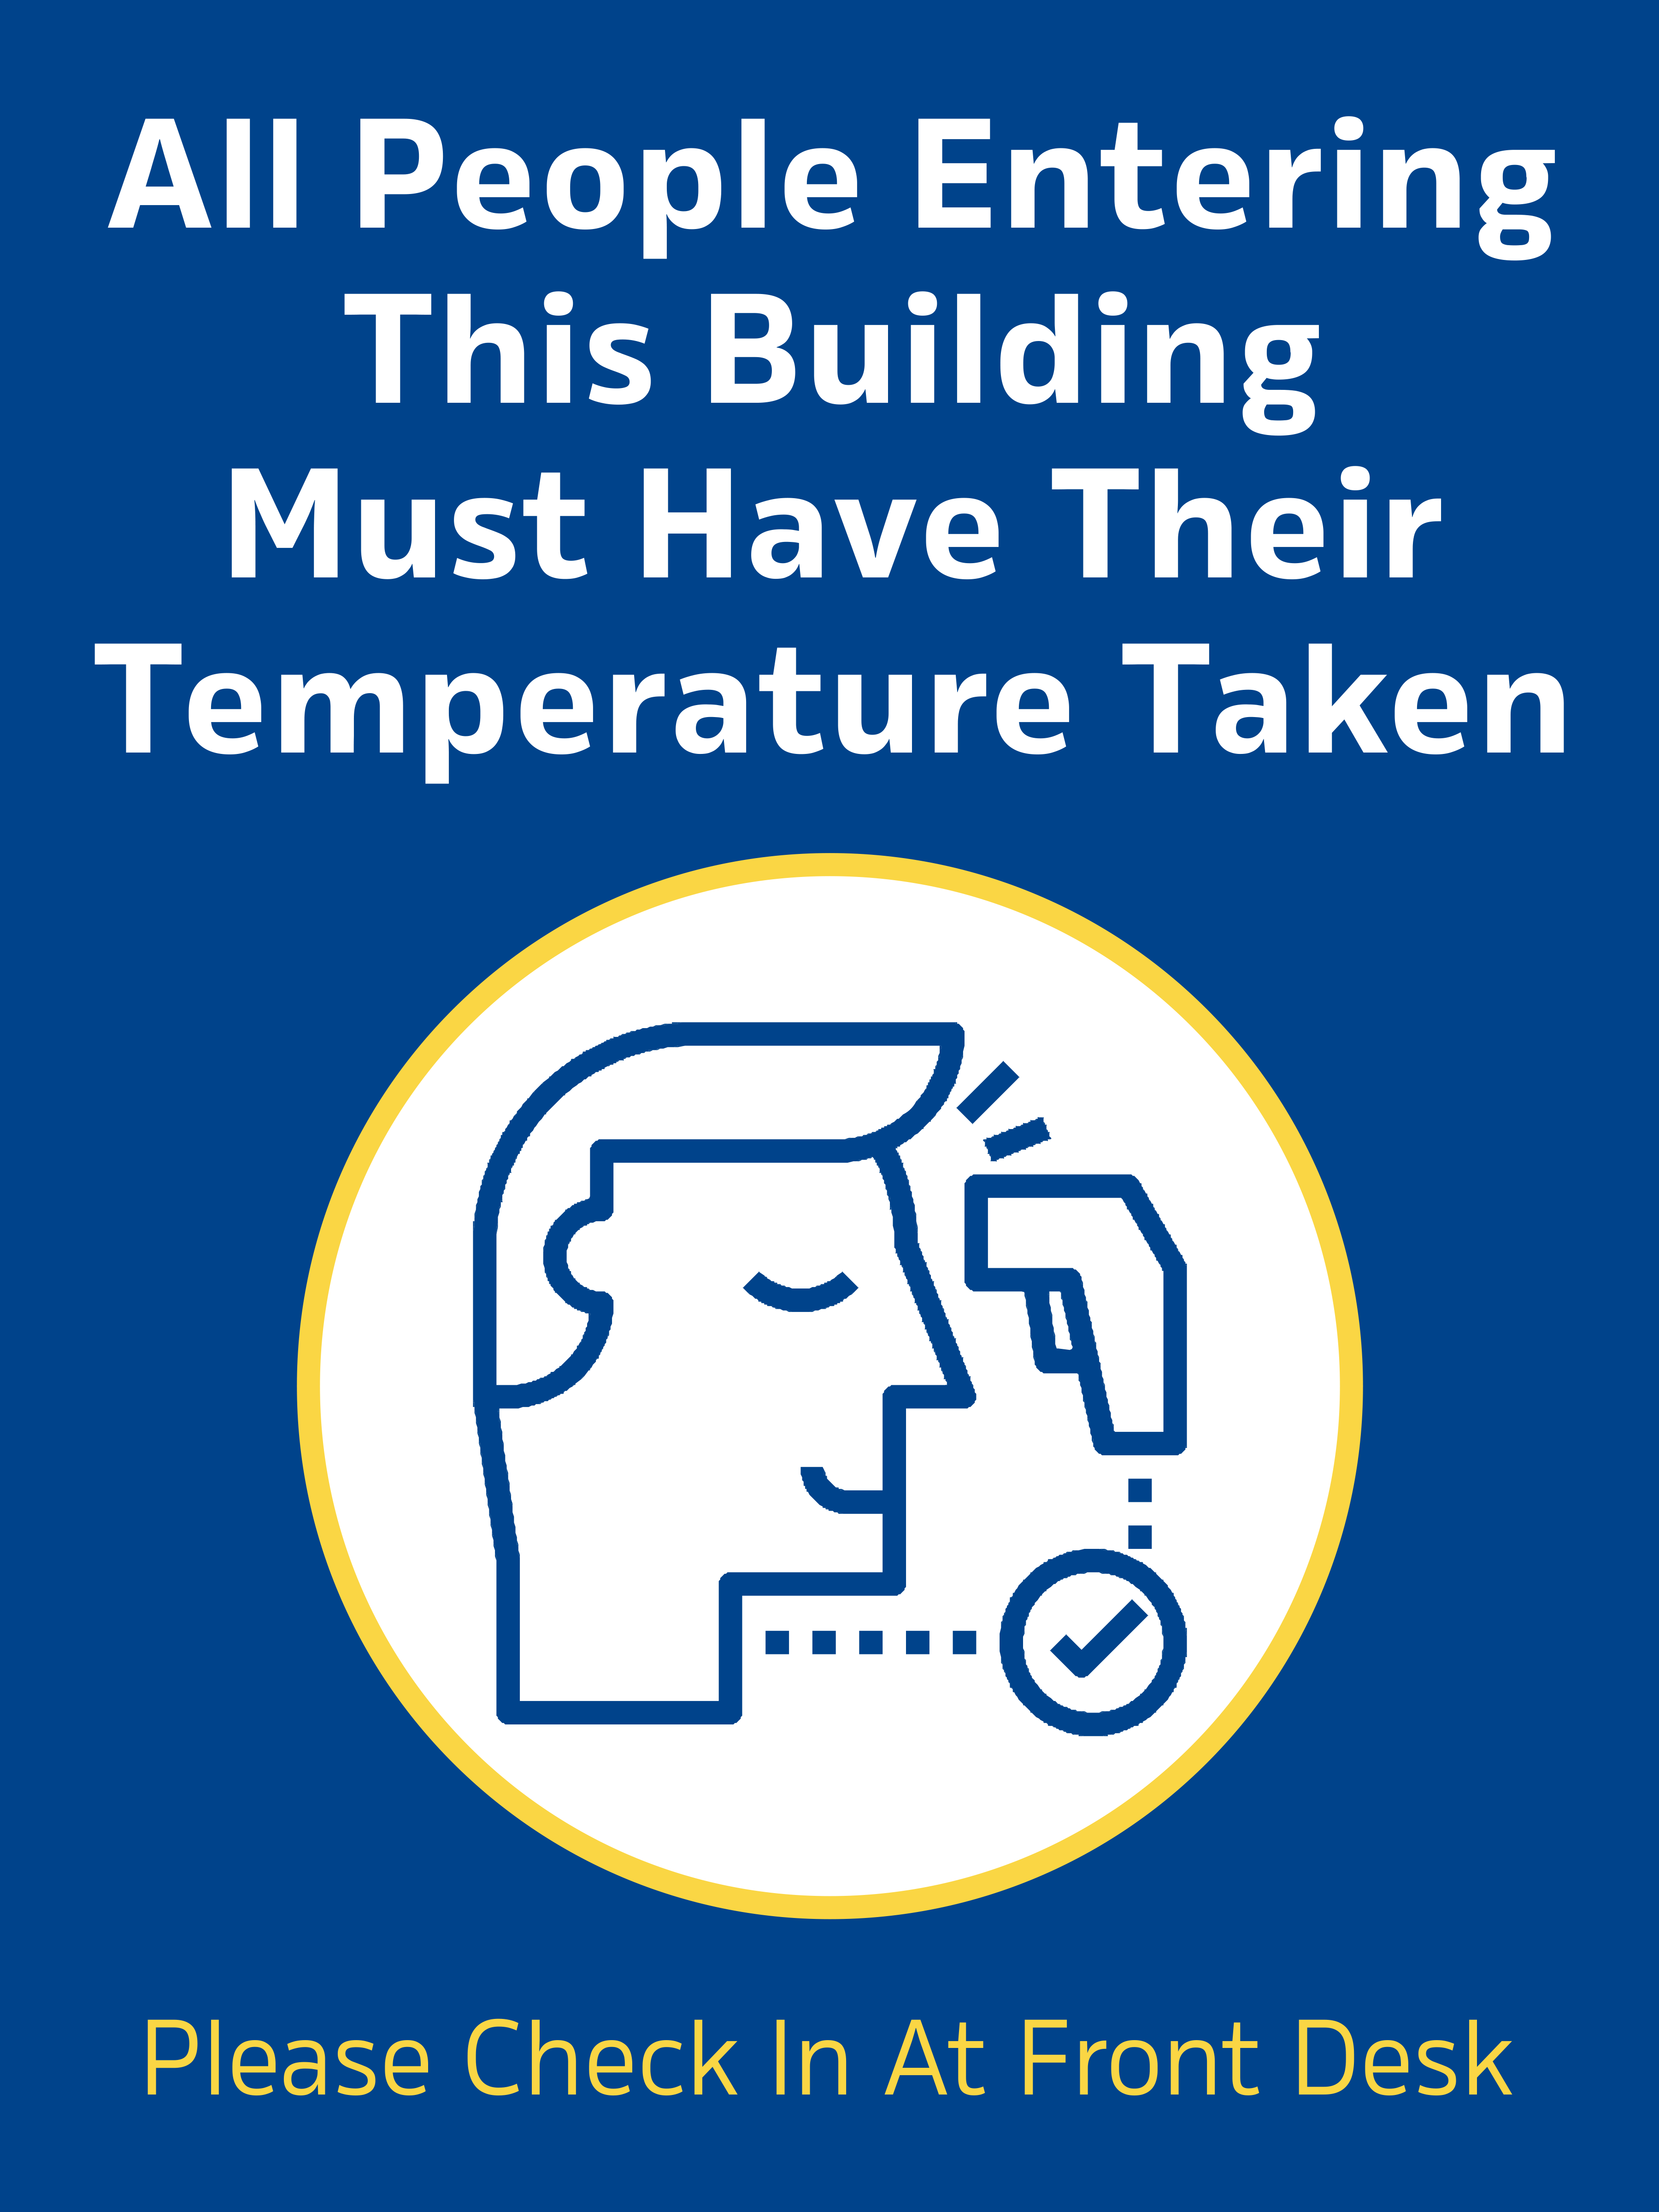 You are currently viewing COVID Signs Displaying Rules for Checking In and Taking Temperatures